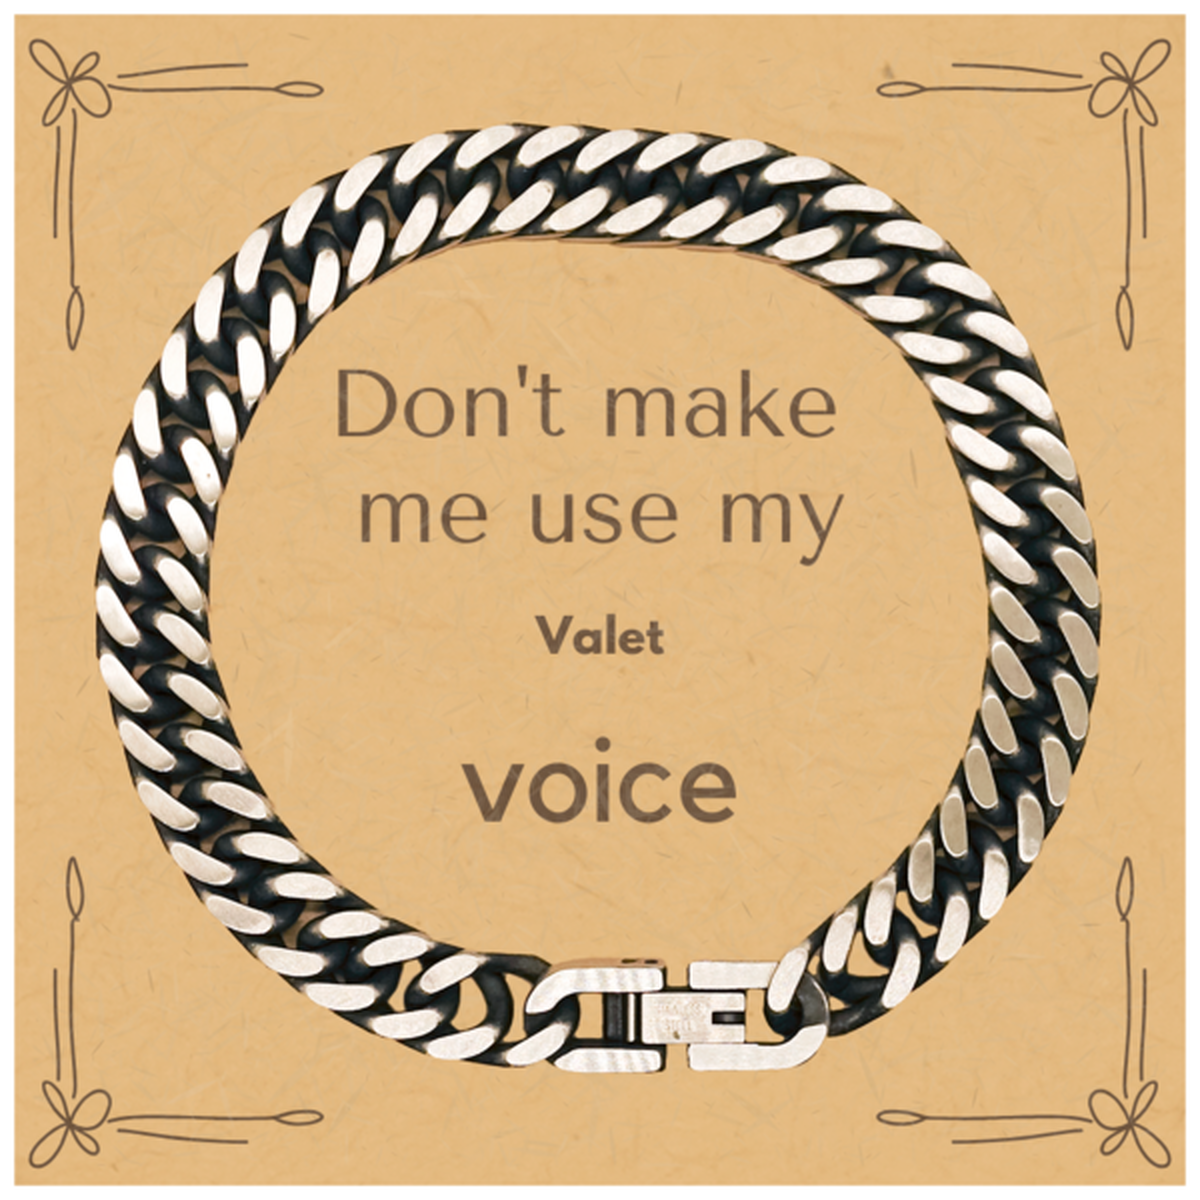 Don't make me use my Valet voice, Sarcasm Valet Card Gifts, Christmas Valet Cuban Link Chain Bracelet Birthday Unique Gifts For Valet Coworkers, Men, Women, Colleague, Friends